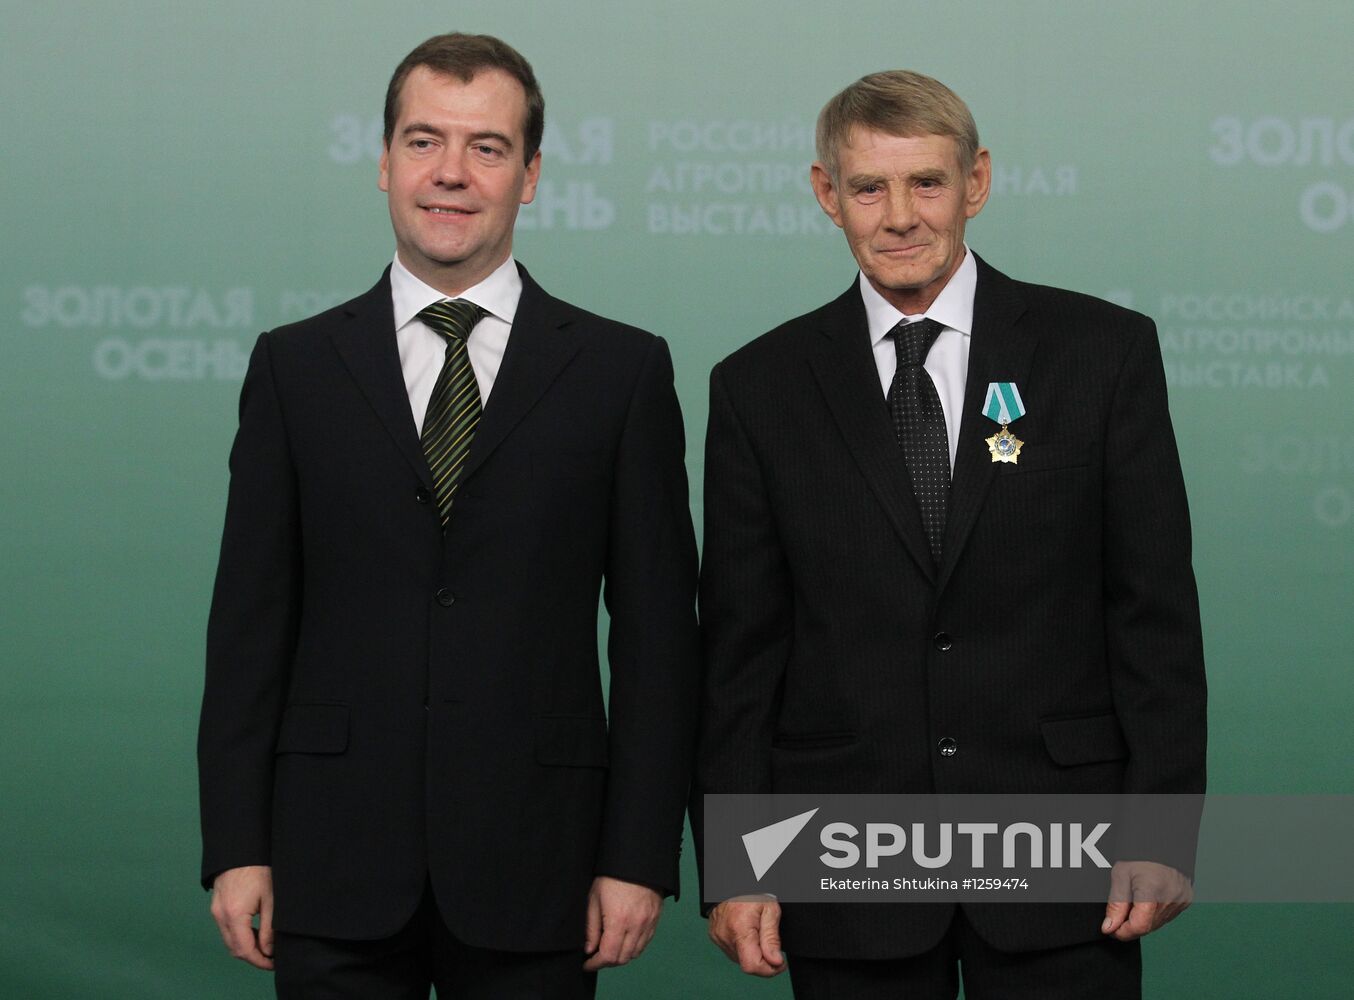 Dmitry Medvedev presents state awards to agro-industrial workers